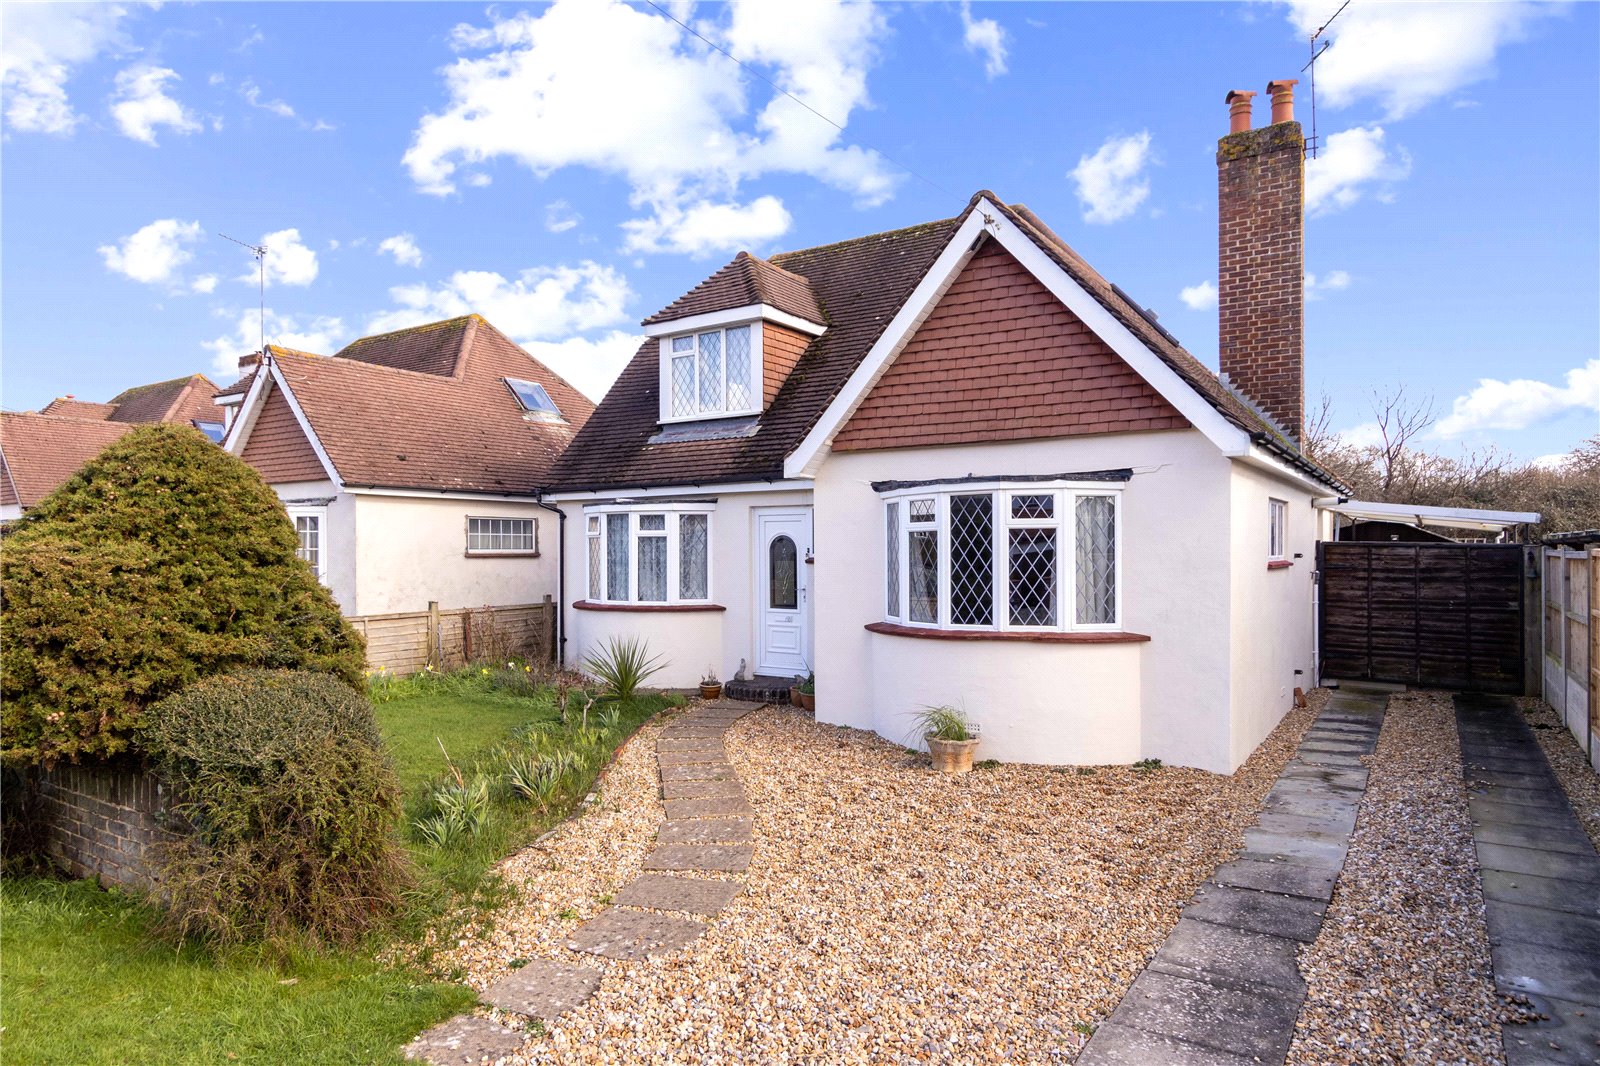 3 bed house for sale in Grafton Avenue, Felpham - Property Image 1